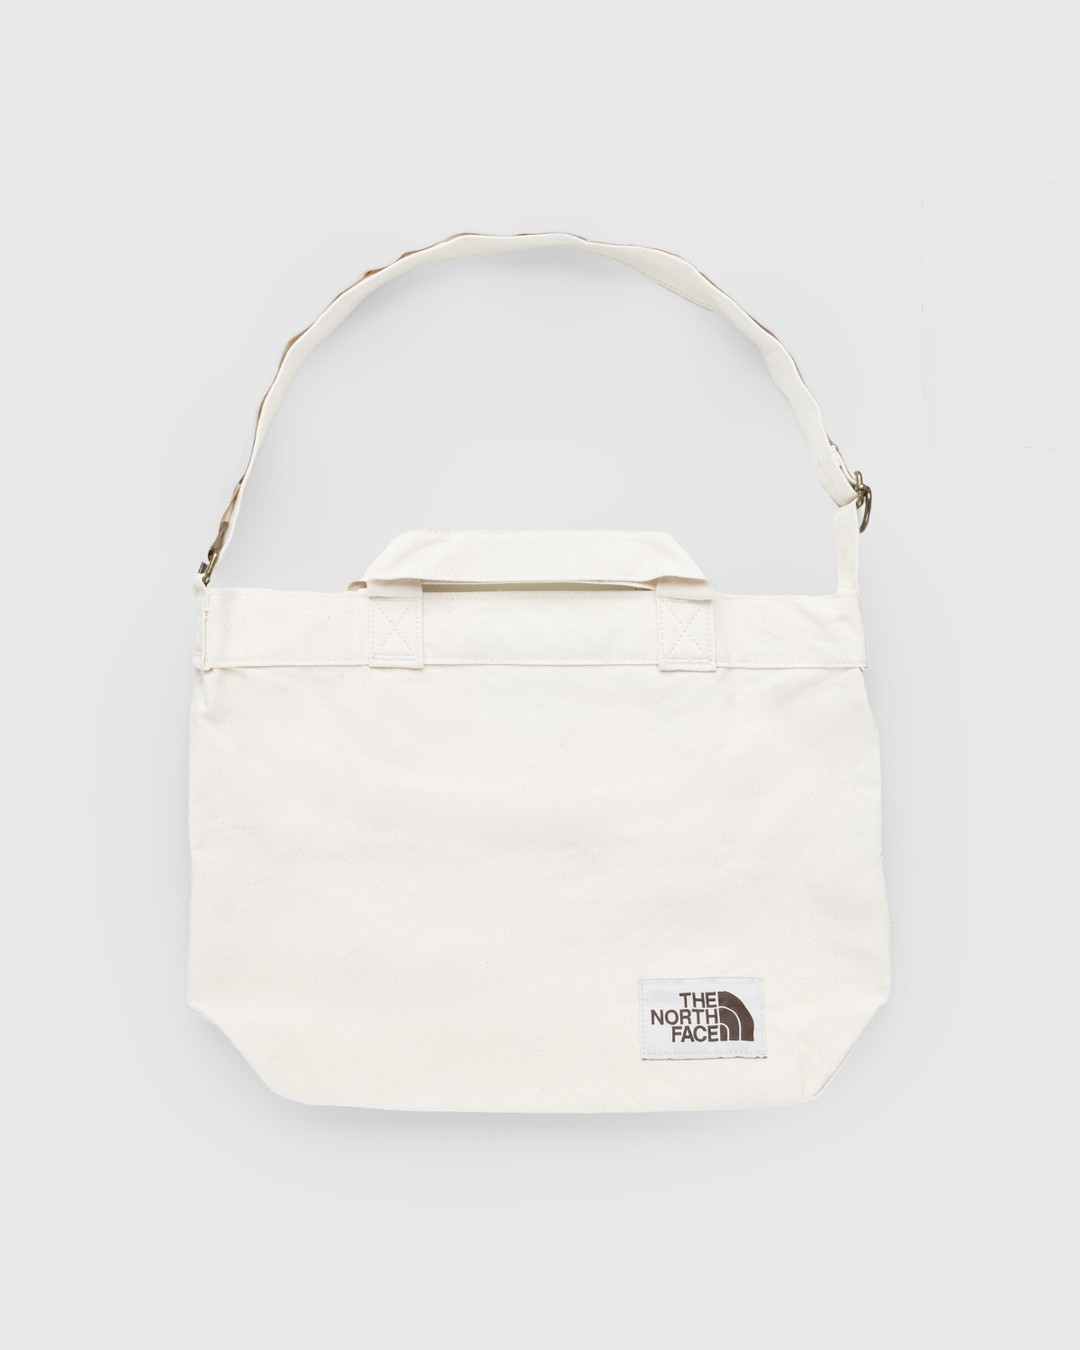 The North Face – Adjustable Cotton Tote Bag Beige | Highsnobiety Shop